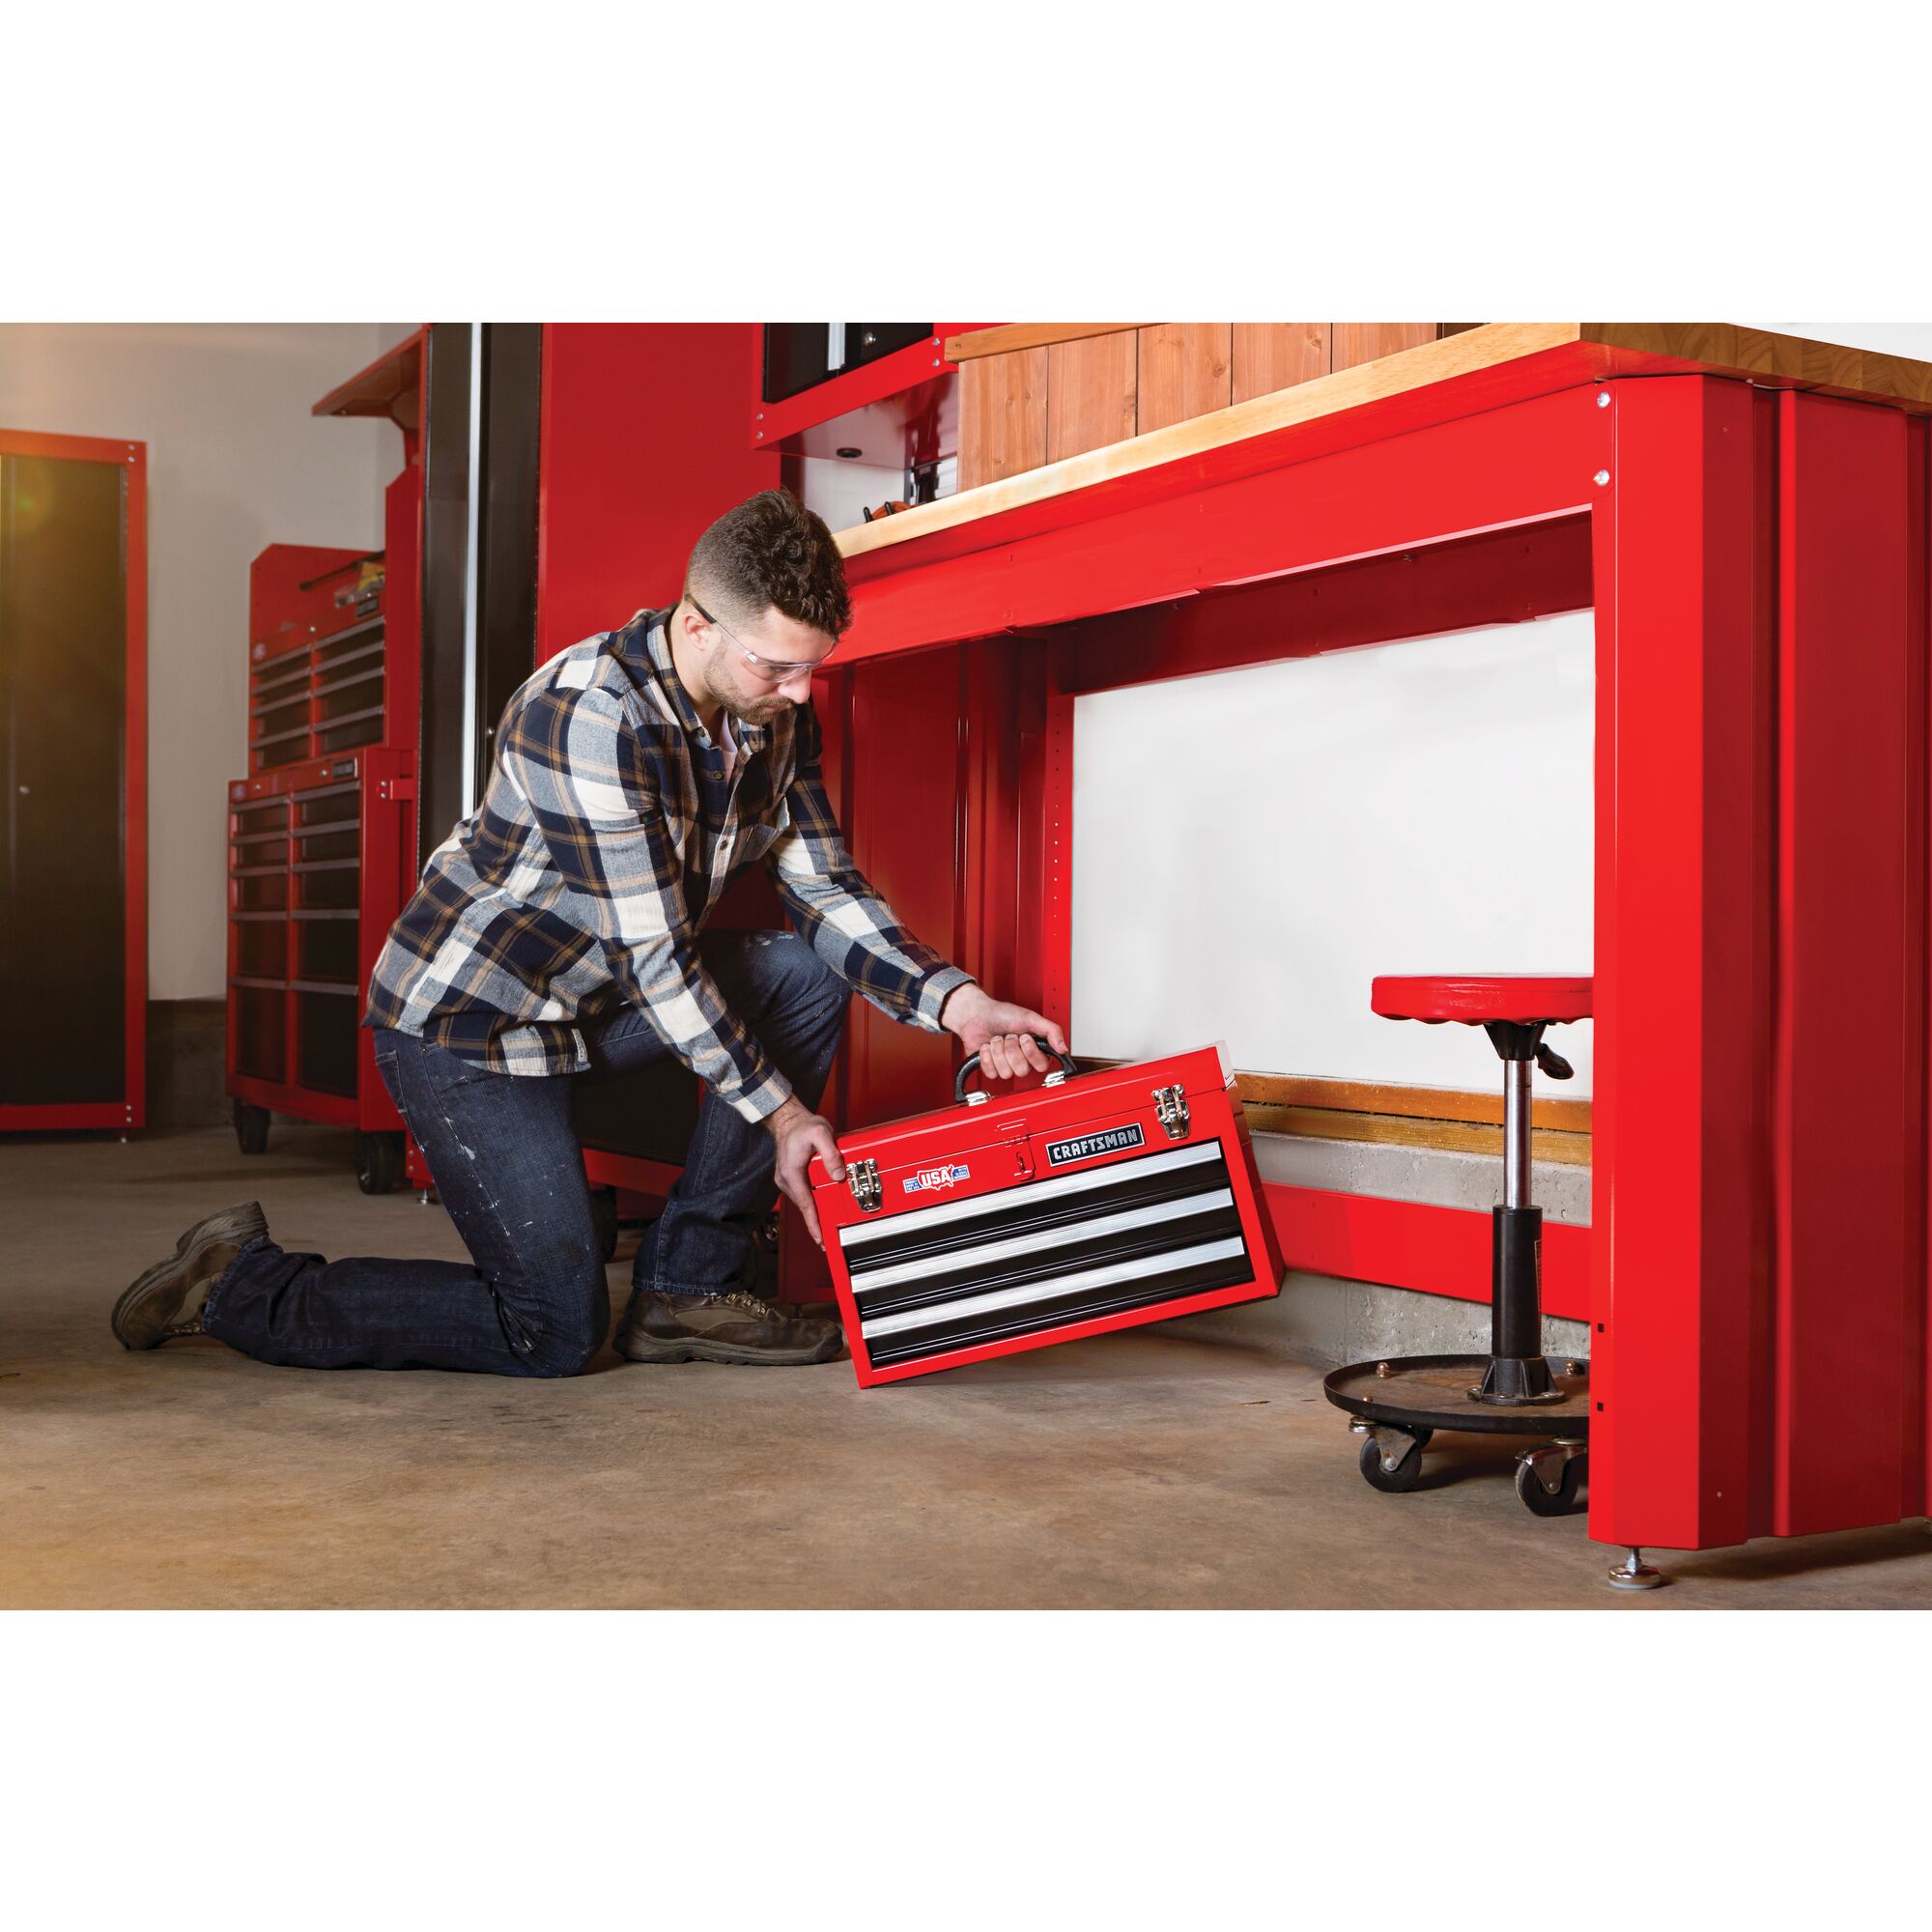 View of CRAFTSMAN Bench & Stationary: Workbench  being used by consumer